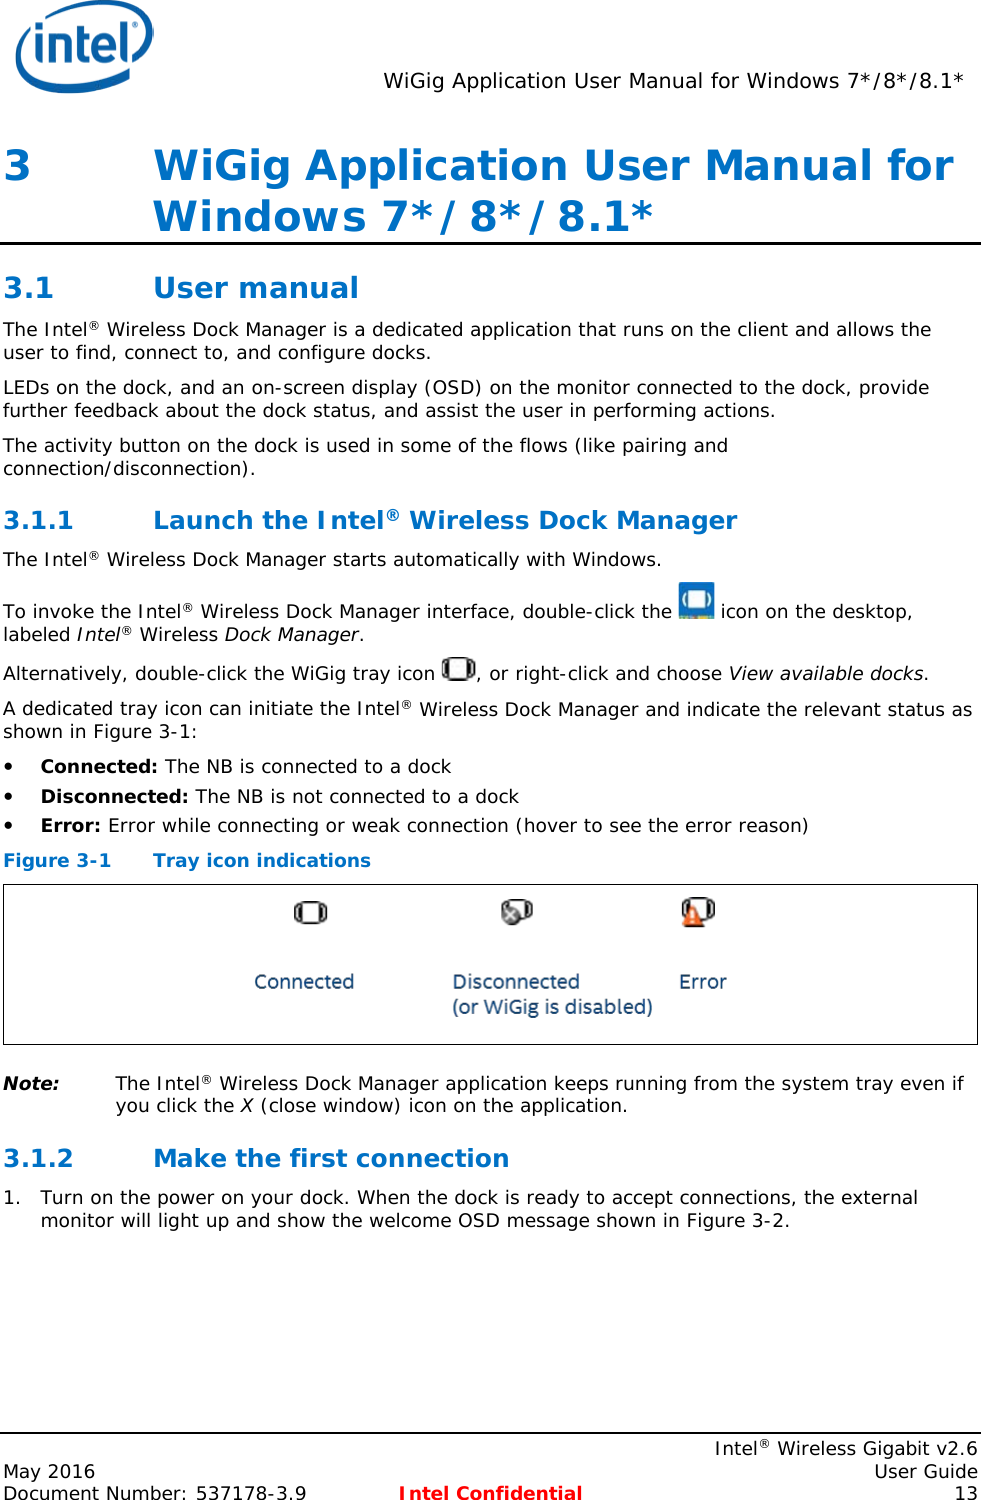  WiGig Application User Manual for Windows 7*/8*/8.1*    Intel® Wireless Gigabit v2.6 May 2016    User Guide Document Number: 537178-3.9 Intel Confidential 13 3   WiGig Application User Manual for Windows 7*/8*/8.1* 3.1 User manual The Intel® Wireless Dock Manager is a dedicated application that runs on the client and allows the user to find, connect to, and configure docks. LEDs on the dock, and an on-screen display (OSD) on the monitor connected to the dock, provide further feedback about the dock status, and assist the user in performing actions. The activity button on the dock is used in some of the flows (like pairing and connection/disconnection). 3.1.1 Launch the Intel® Wireless Dock Manager The Intel® Wireless Dock Manager starts automatically with Windows. To invoke the Intel® Wireless Dock Manager interface, double-click the   icon on the desktop, labeled Intel® Wireless Dock Manager. Alternatively, double-click the WiGig tray icon  , or right-click and choose View available docks. A dedicated tray icon can initiate the Intel® Wireless Dock Manager and indicate the relevant status as shown in Figure 3-1:  Connected: The NB is connected to a dock  Disconnected: The NB is not connected to a dock  Error: Error while connecting or weak connection (hover to see the error reason) Figure 3-1  Tray icon indications  Note: The Intel® Wireless Dock Manager application keeps running from the system tray even if you click the X (close window) icon on the application. 3.1.2 Make the first connection 1. Turn on the power on your dock. When the dock is ready to accept connections, the external monitor will light up and show the welcome OSD message shown in Figure 3-2. 